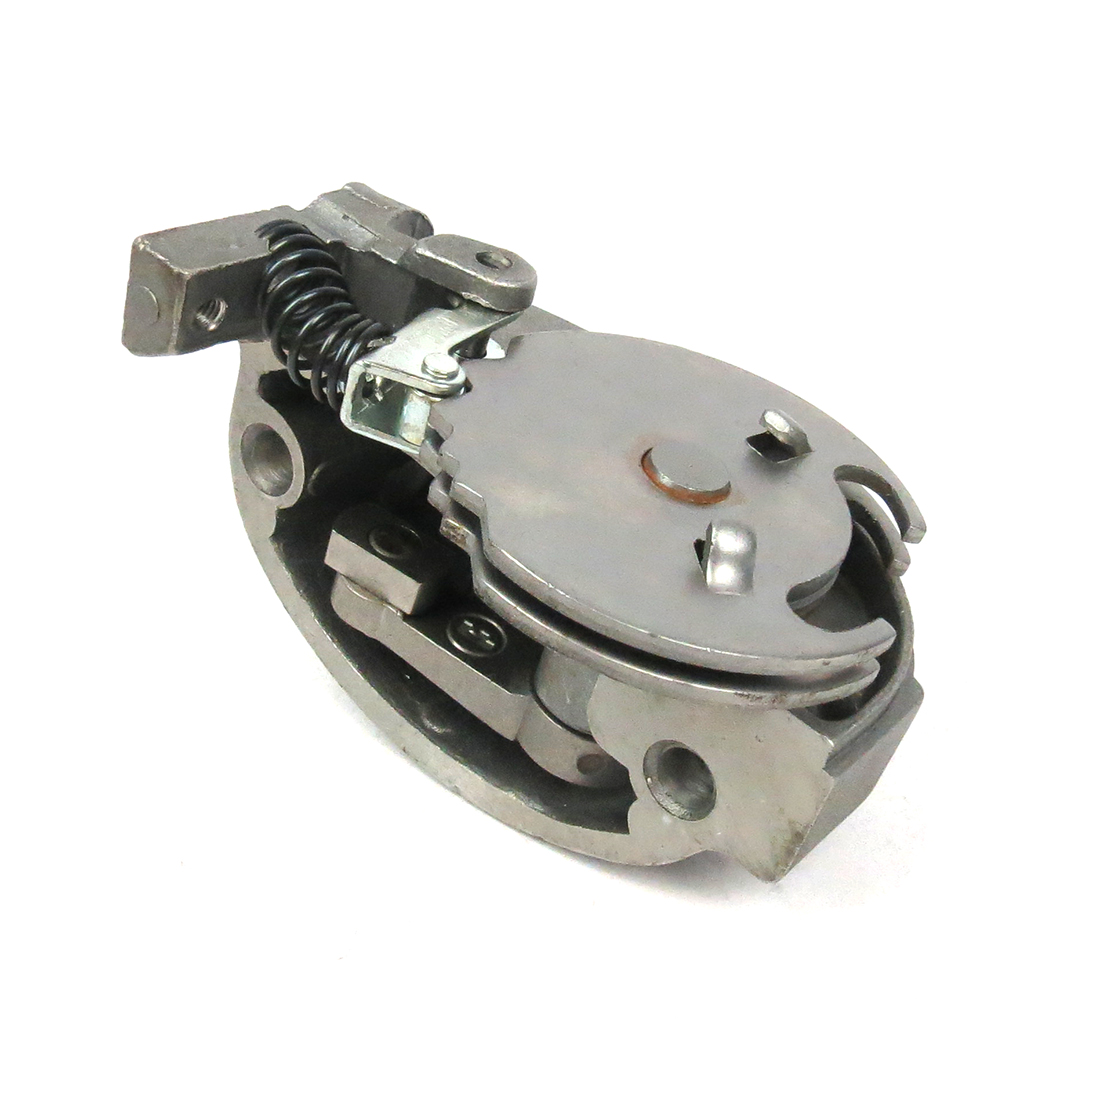 Details about   SELECTOR BOX COVER CHROME VESPA PX150/T5/PX200/PX125/LML/STAR/STELLA New Brand 